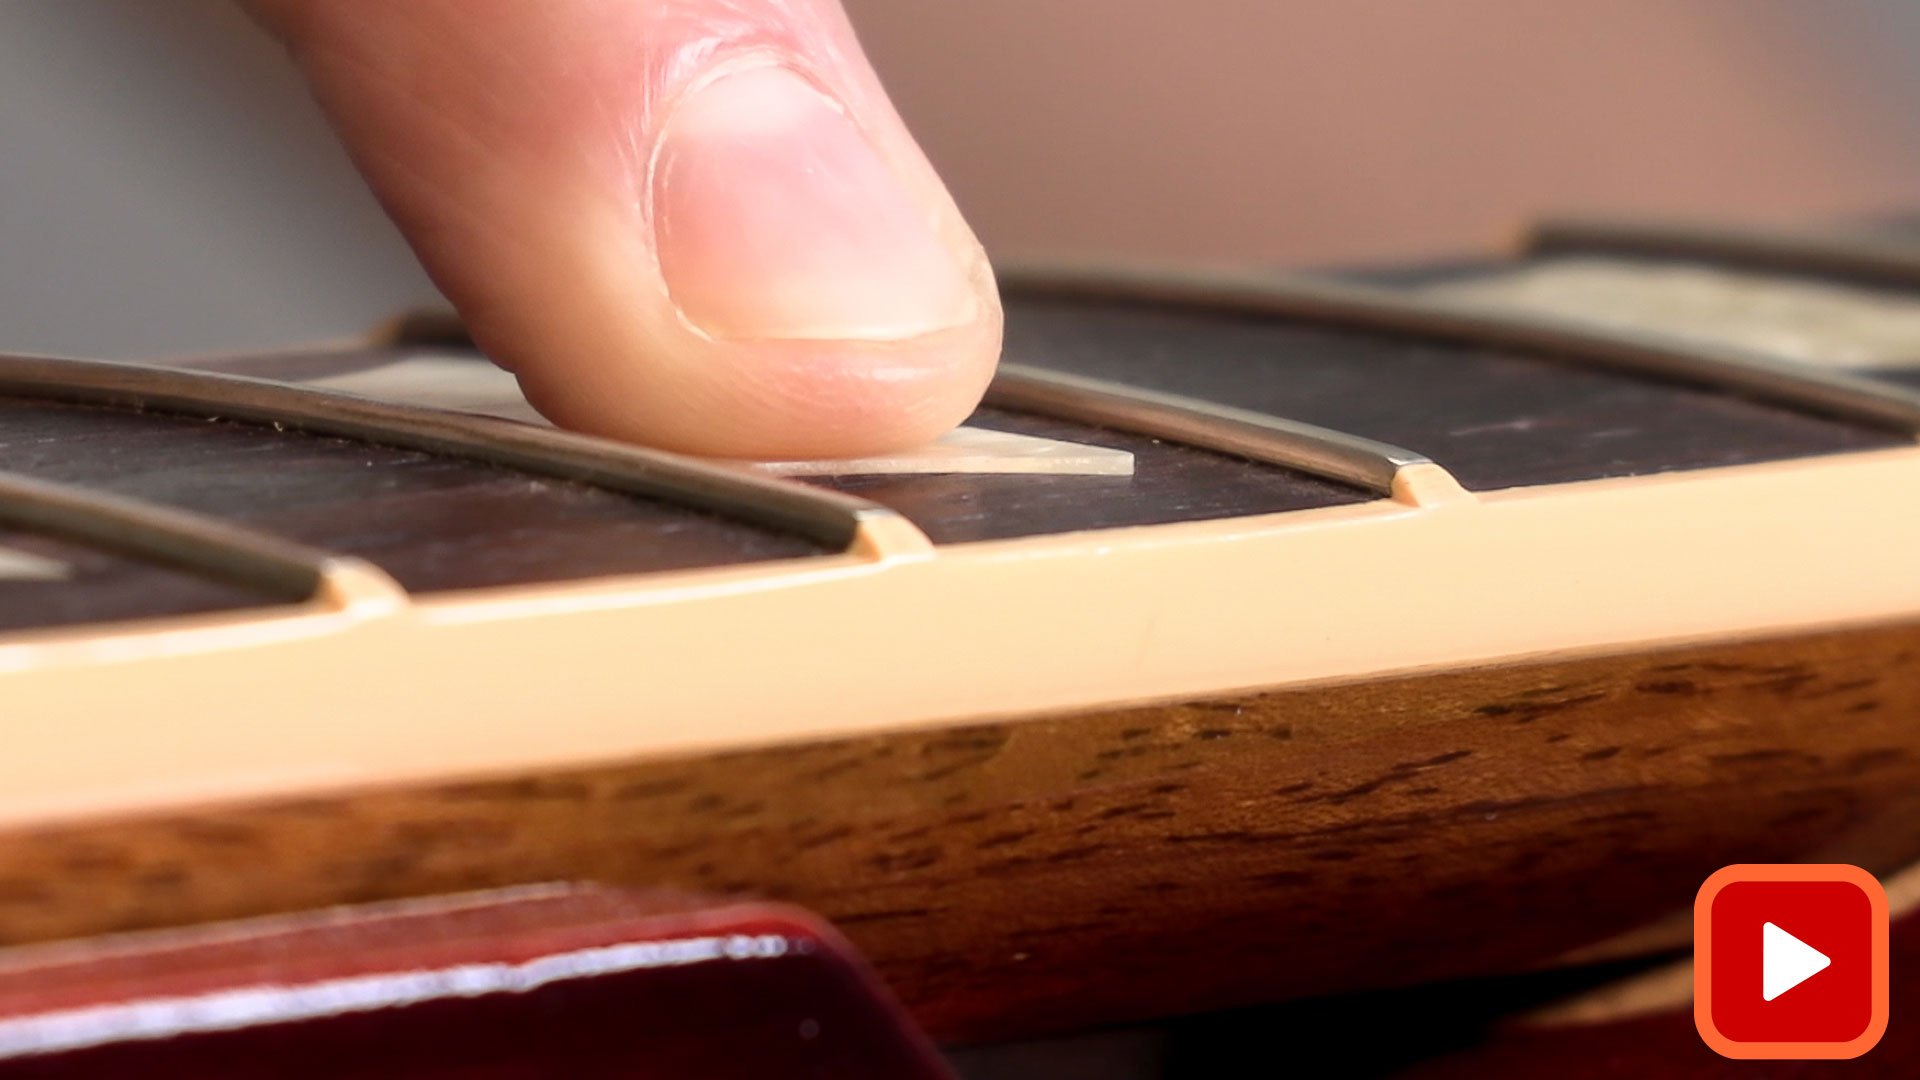 Finger showing inlay raised above fingerboard